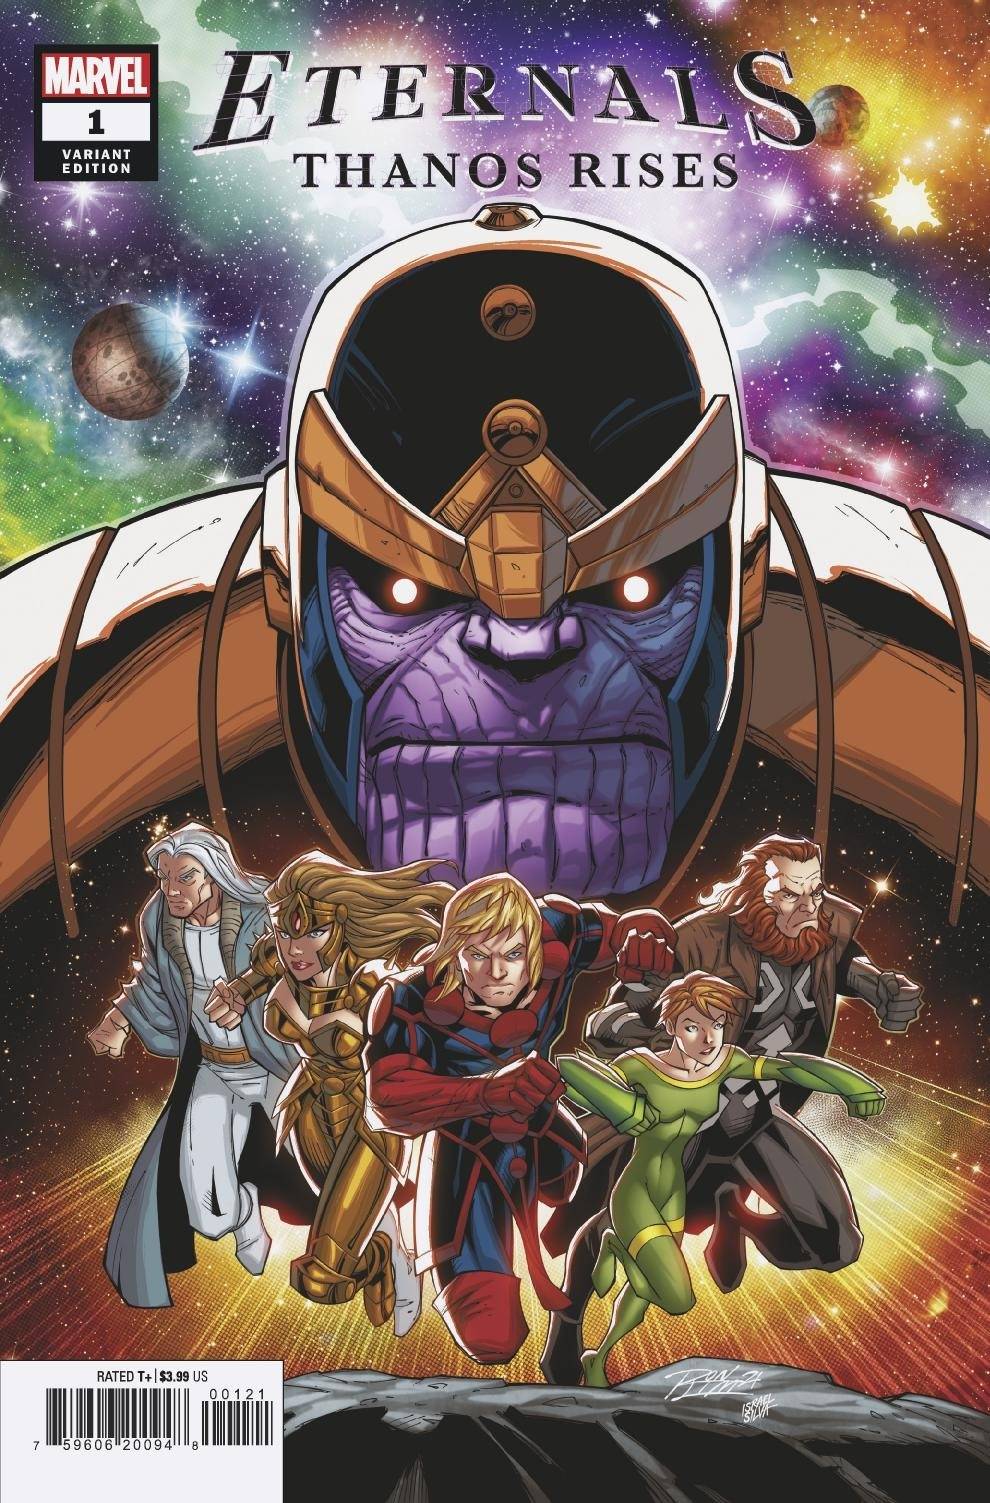 Photo of Eternals Thanos Rises Issue 1 Ron Lim Var comic sold by Stronghold Collectibles